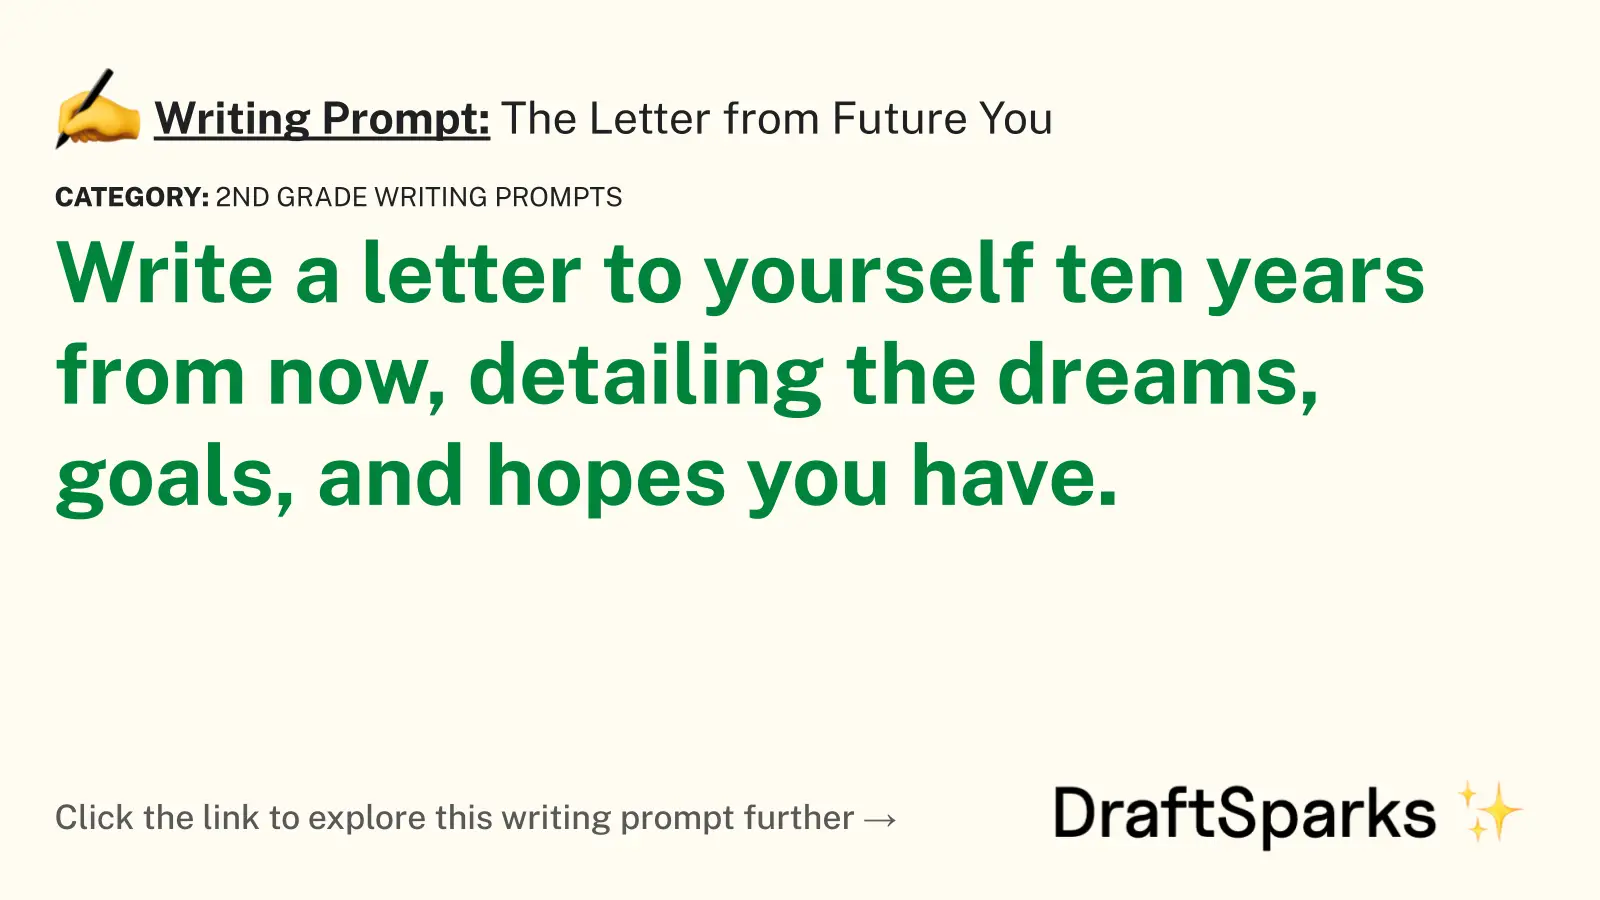 The Letter from Future You